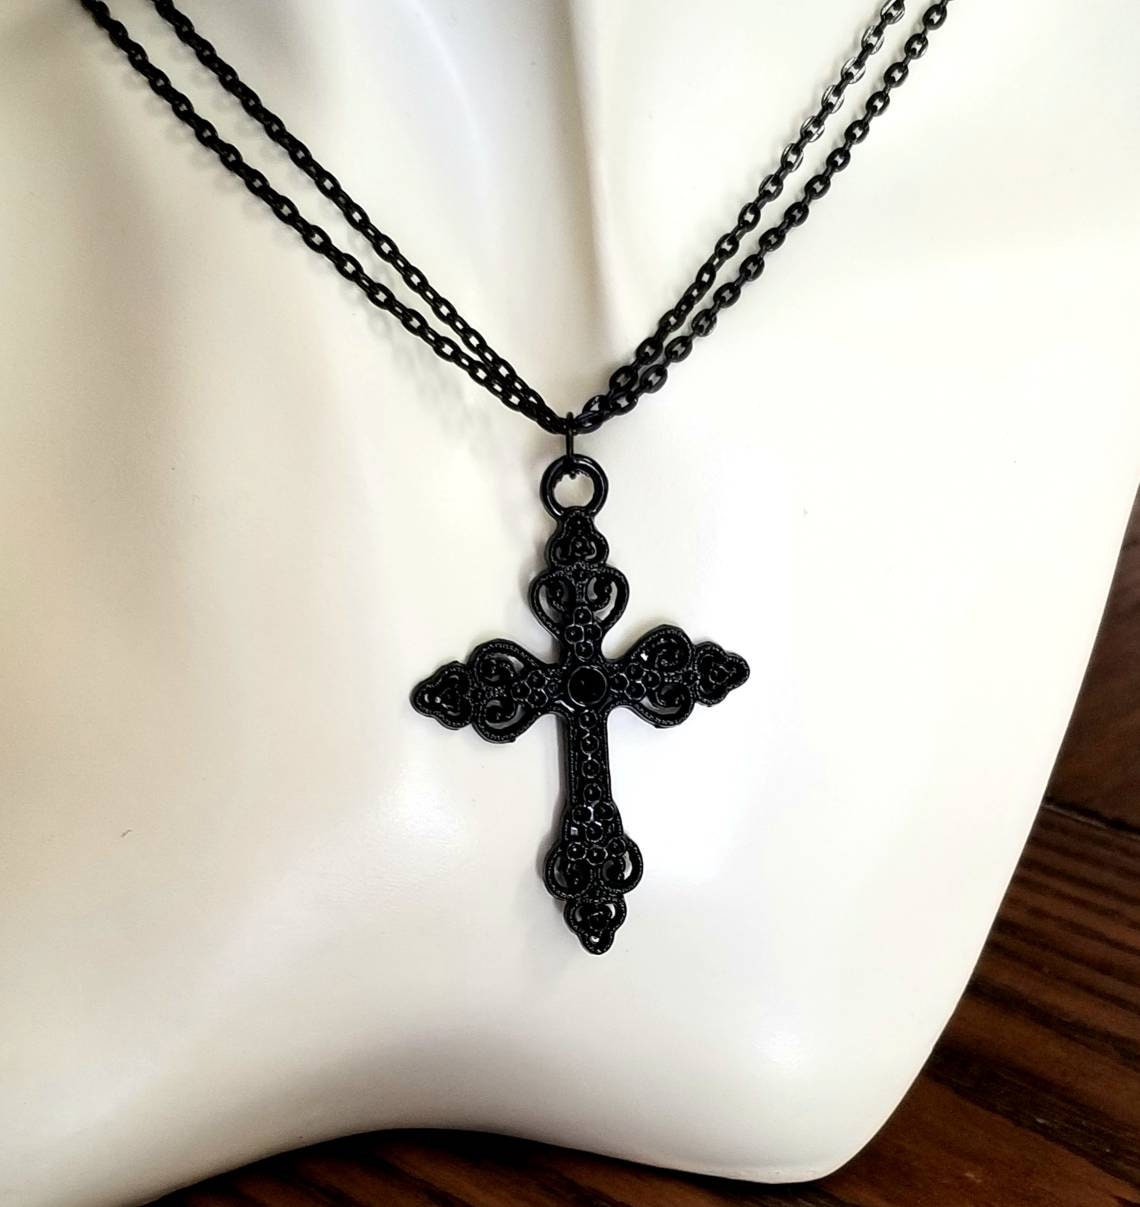 Handmade Vintage Stretch Tattoo Lace Choker Necklace For Women Gothic Punk  Elastic Cross Pendant Gothic Jewelry From Commo_dpp, $0.43